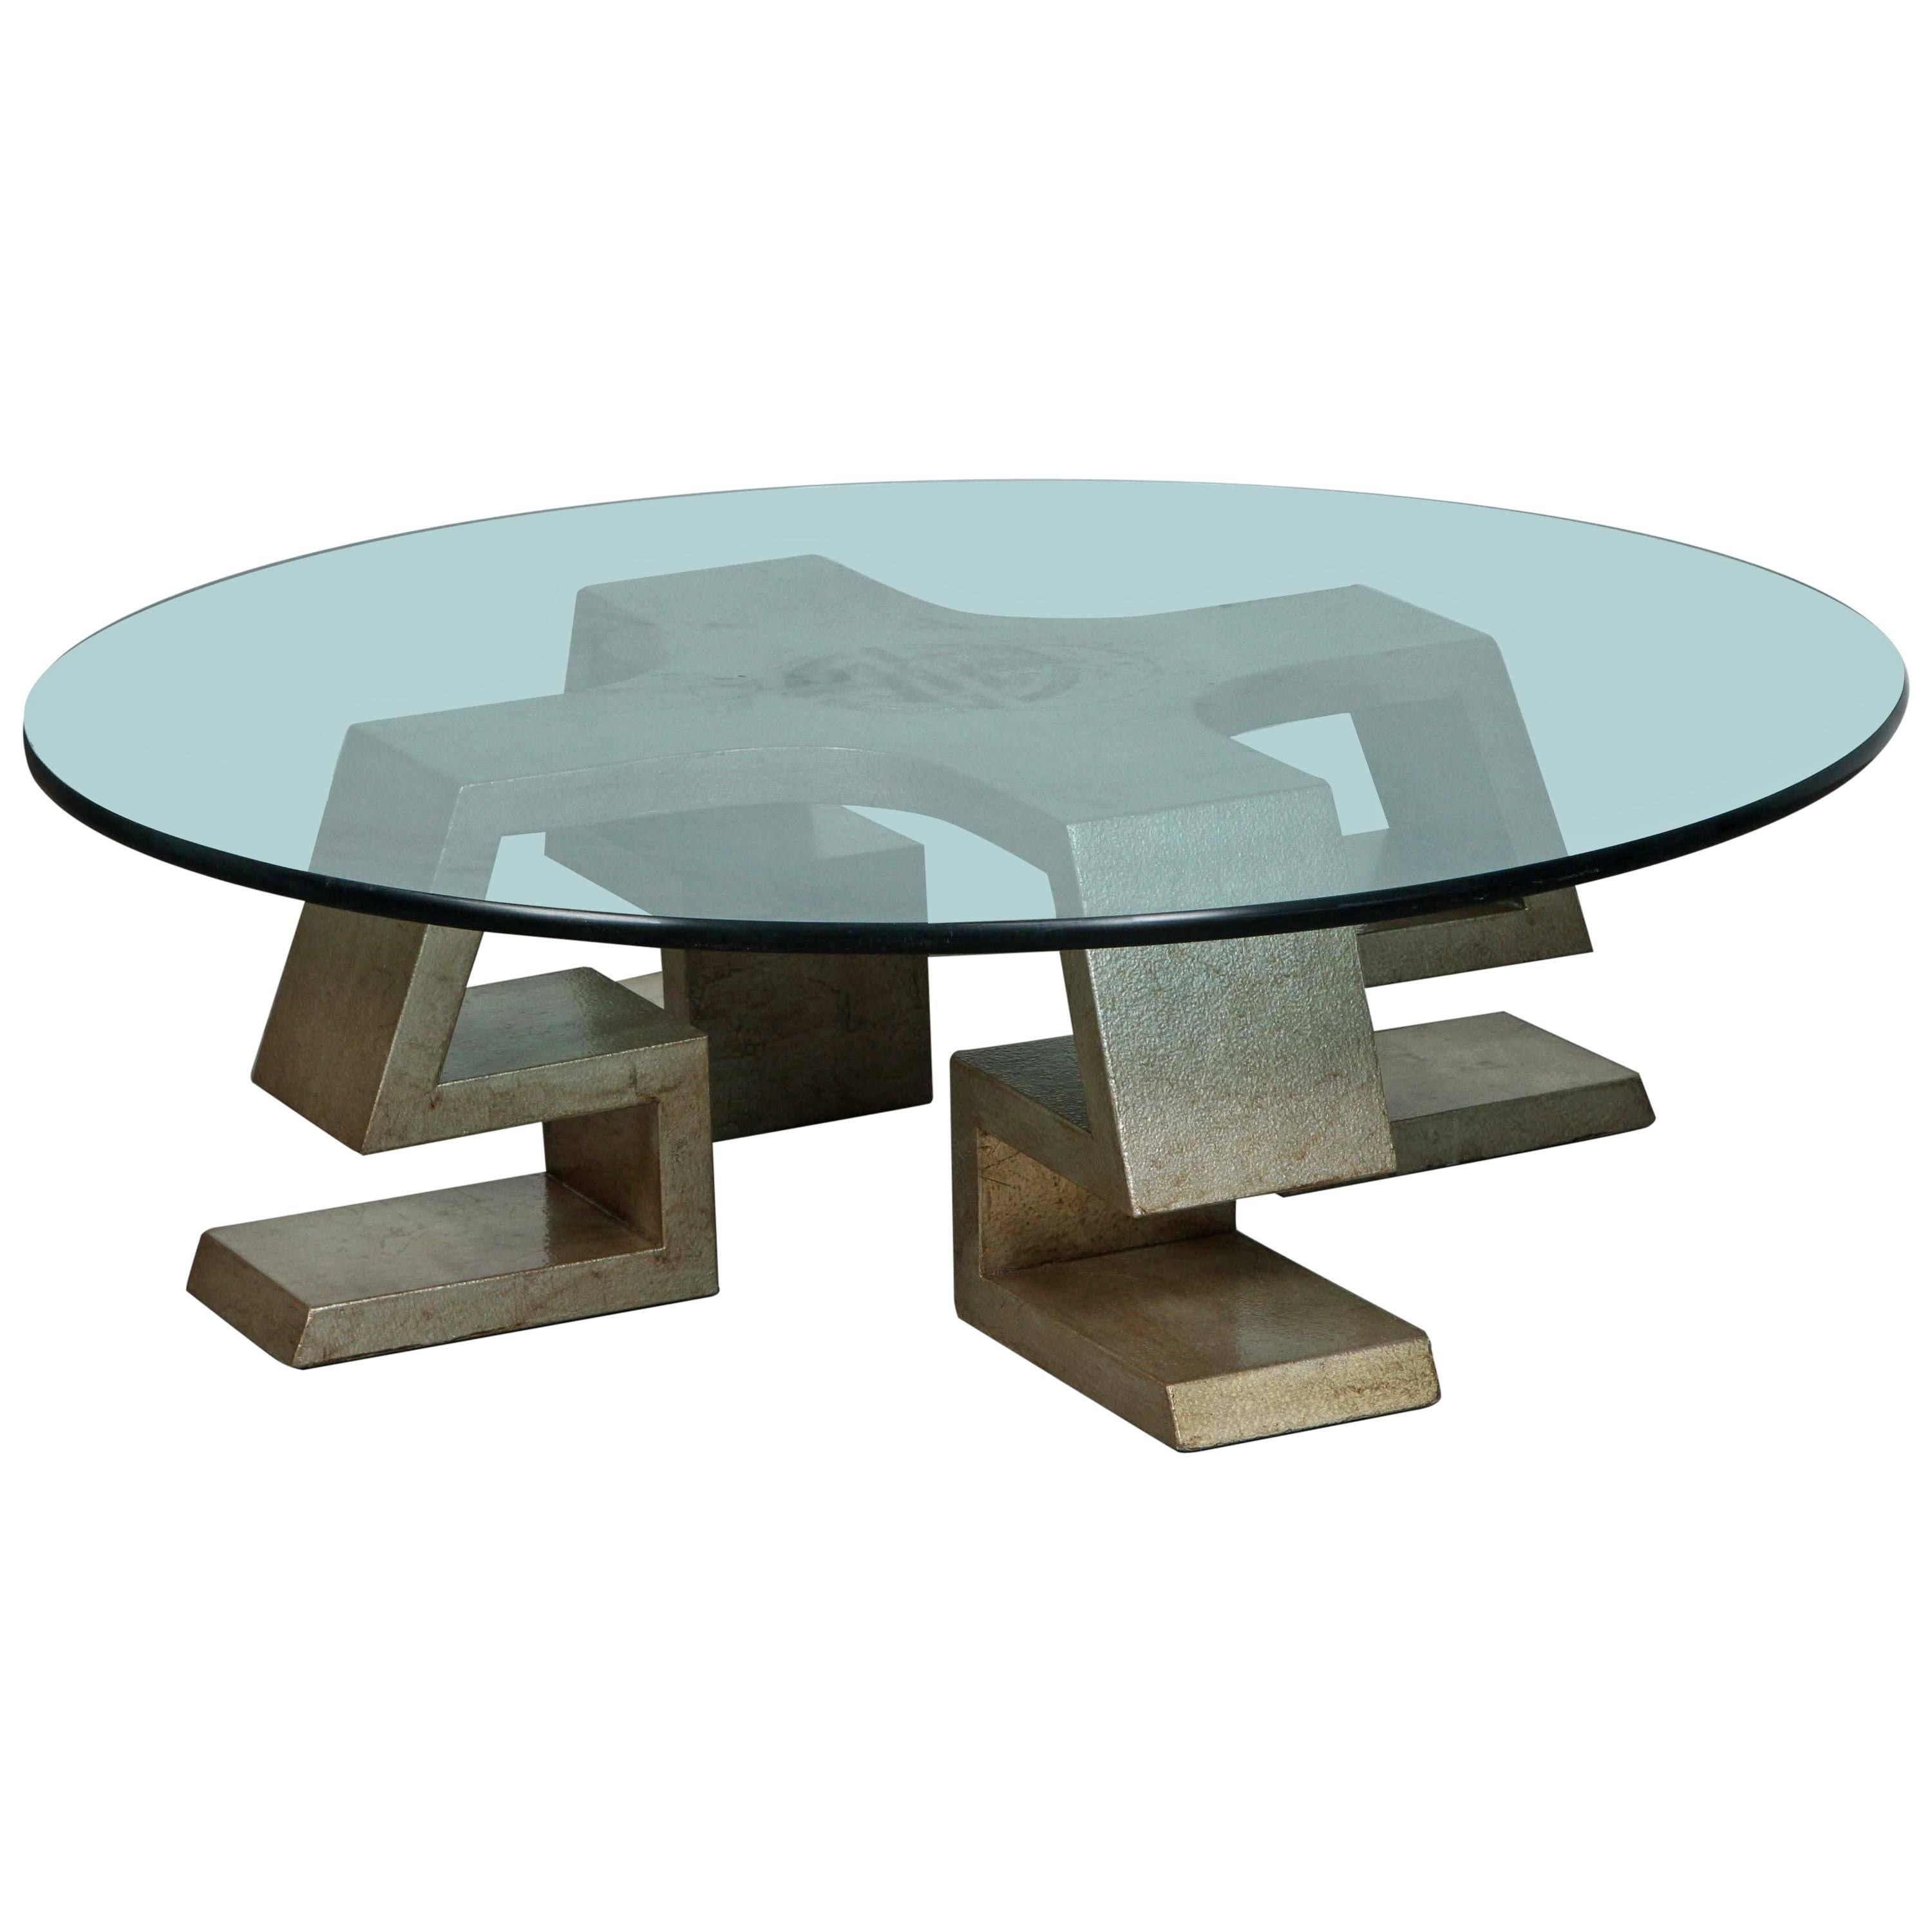 Exquisite Rare James Mont Coffee Table